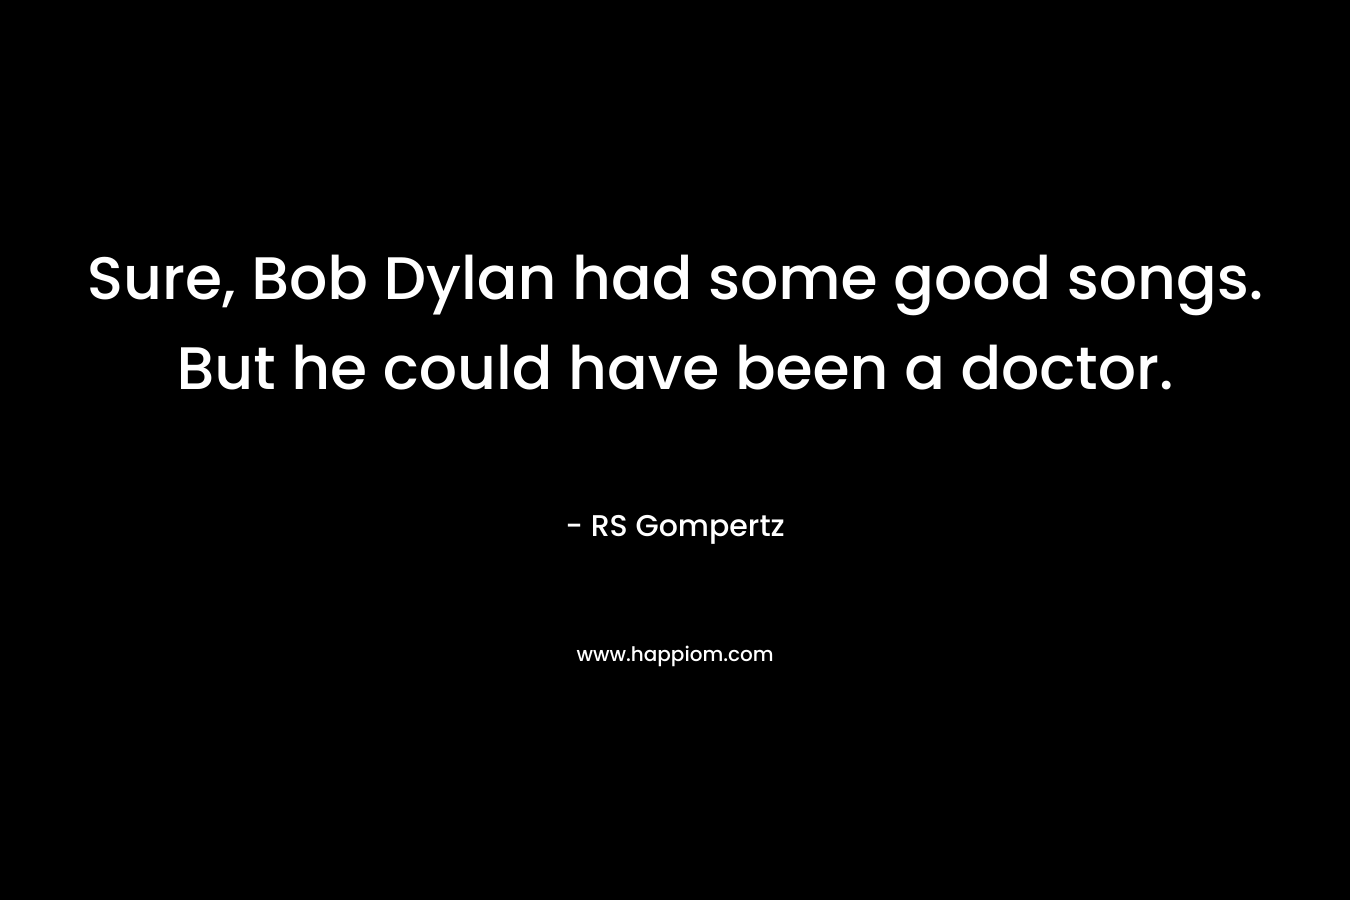 Sure, Bob Dylan had some good songs. But he could have been a doctor.